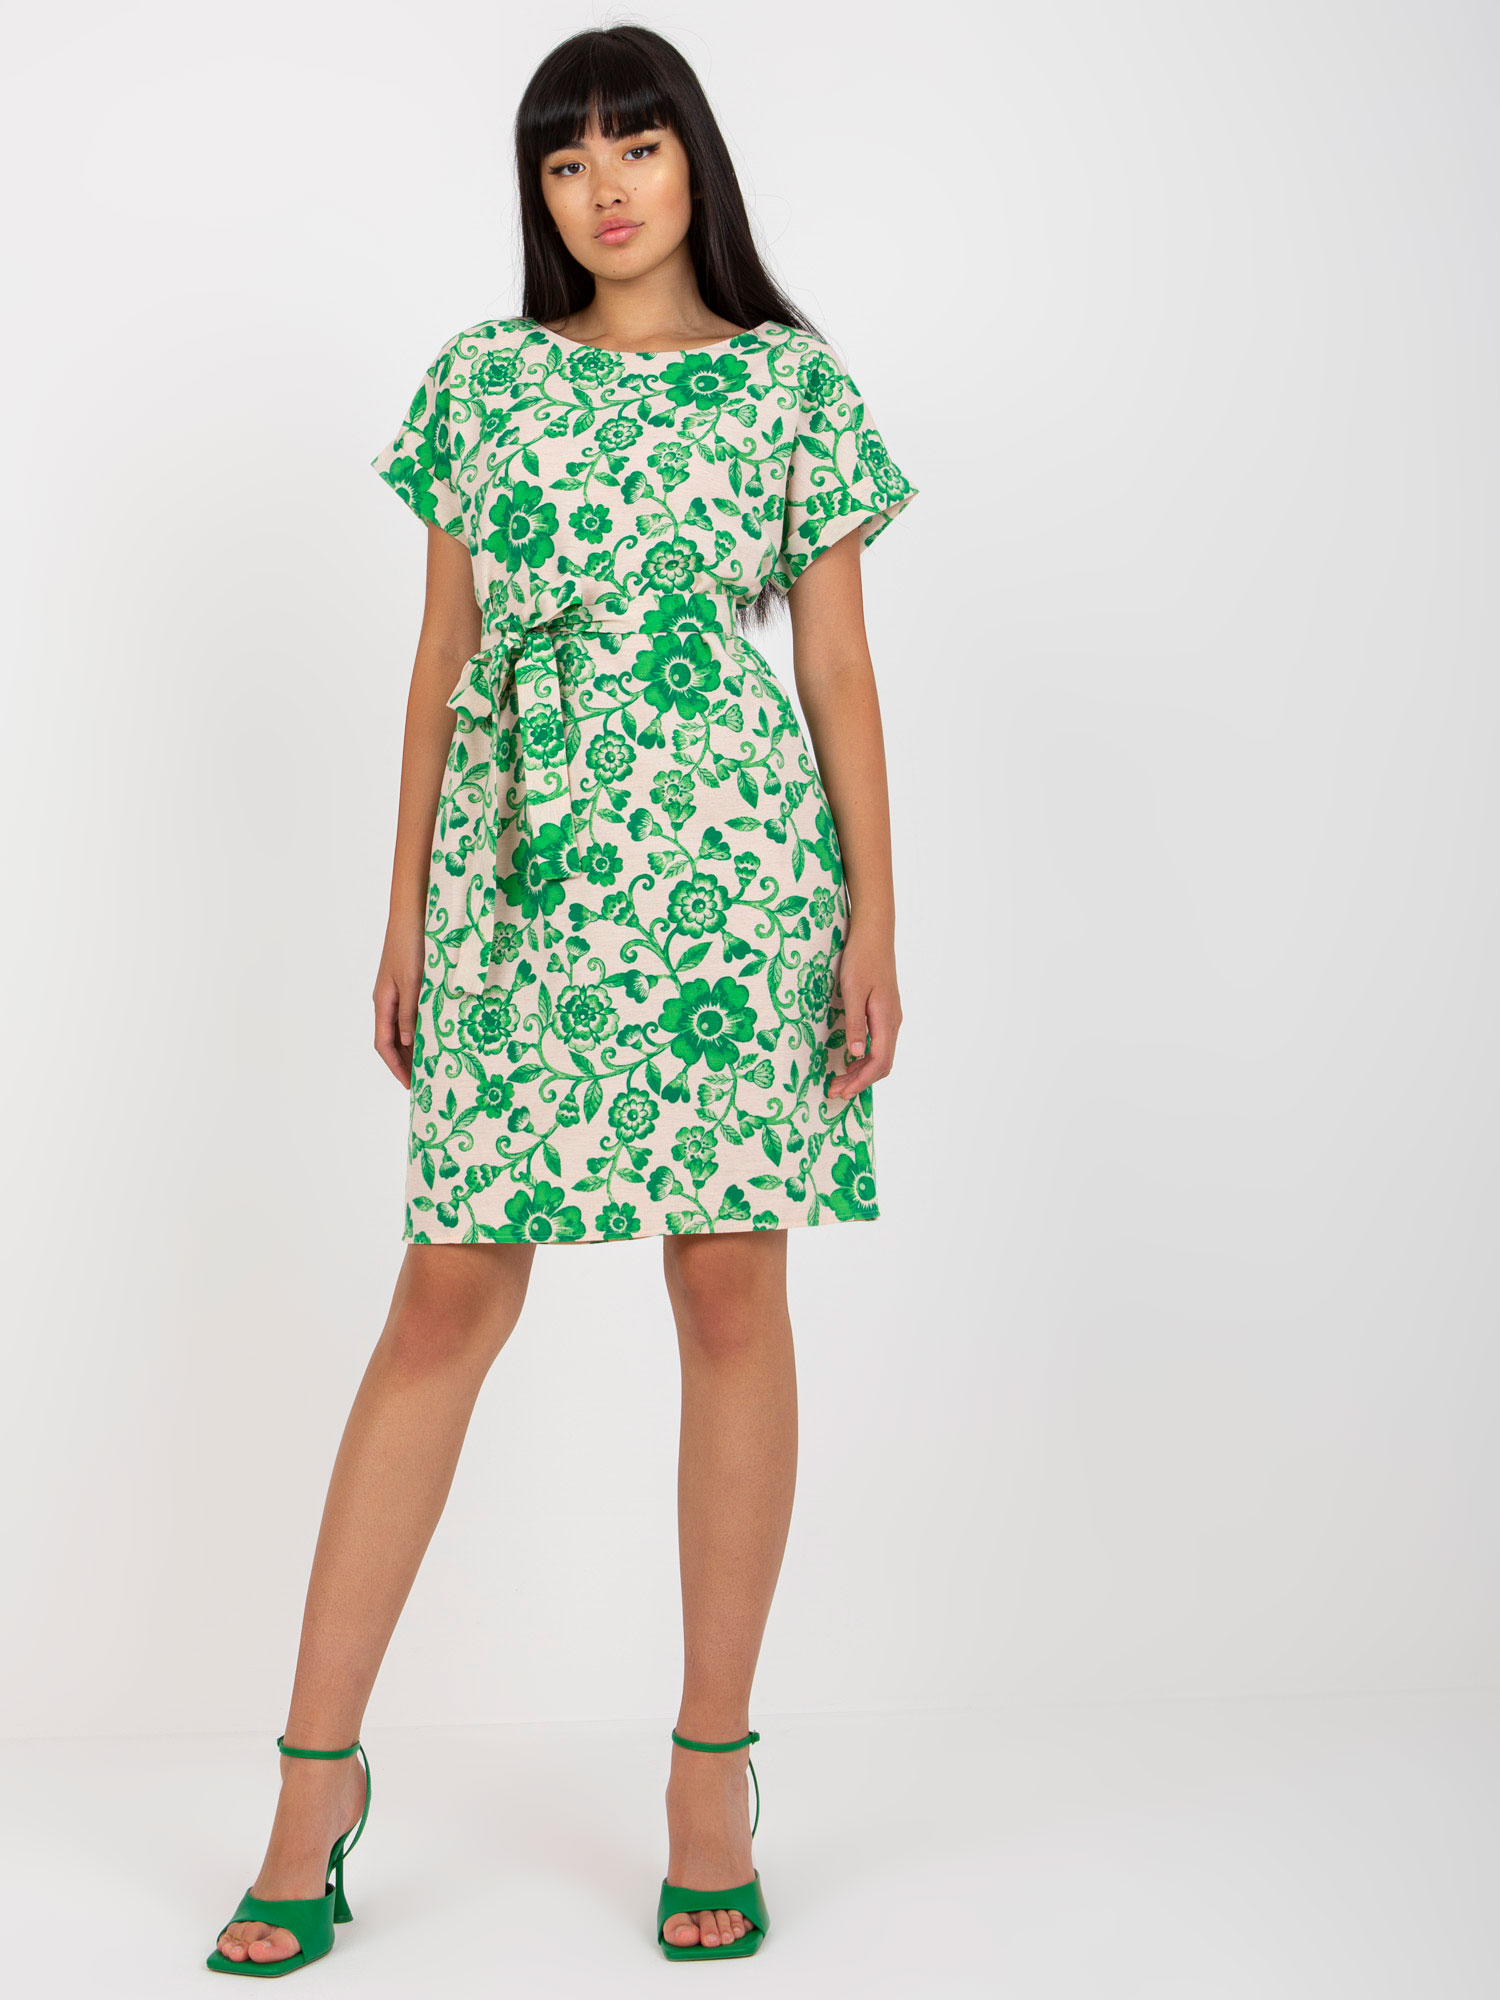 Beige And Green Linen Floral Dress With Tie